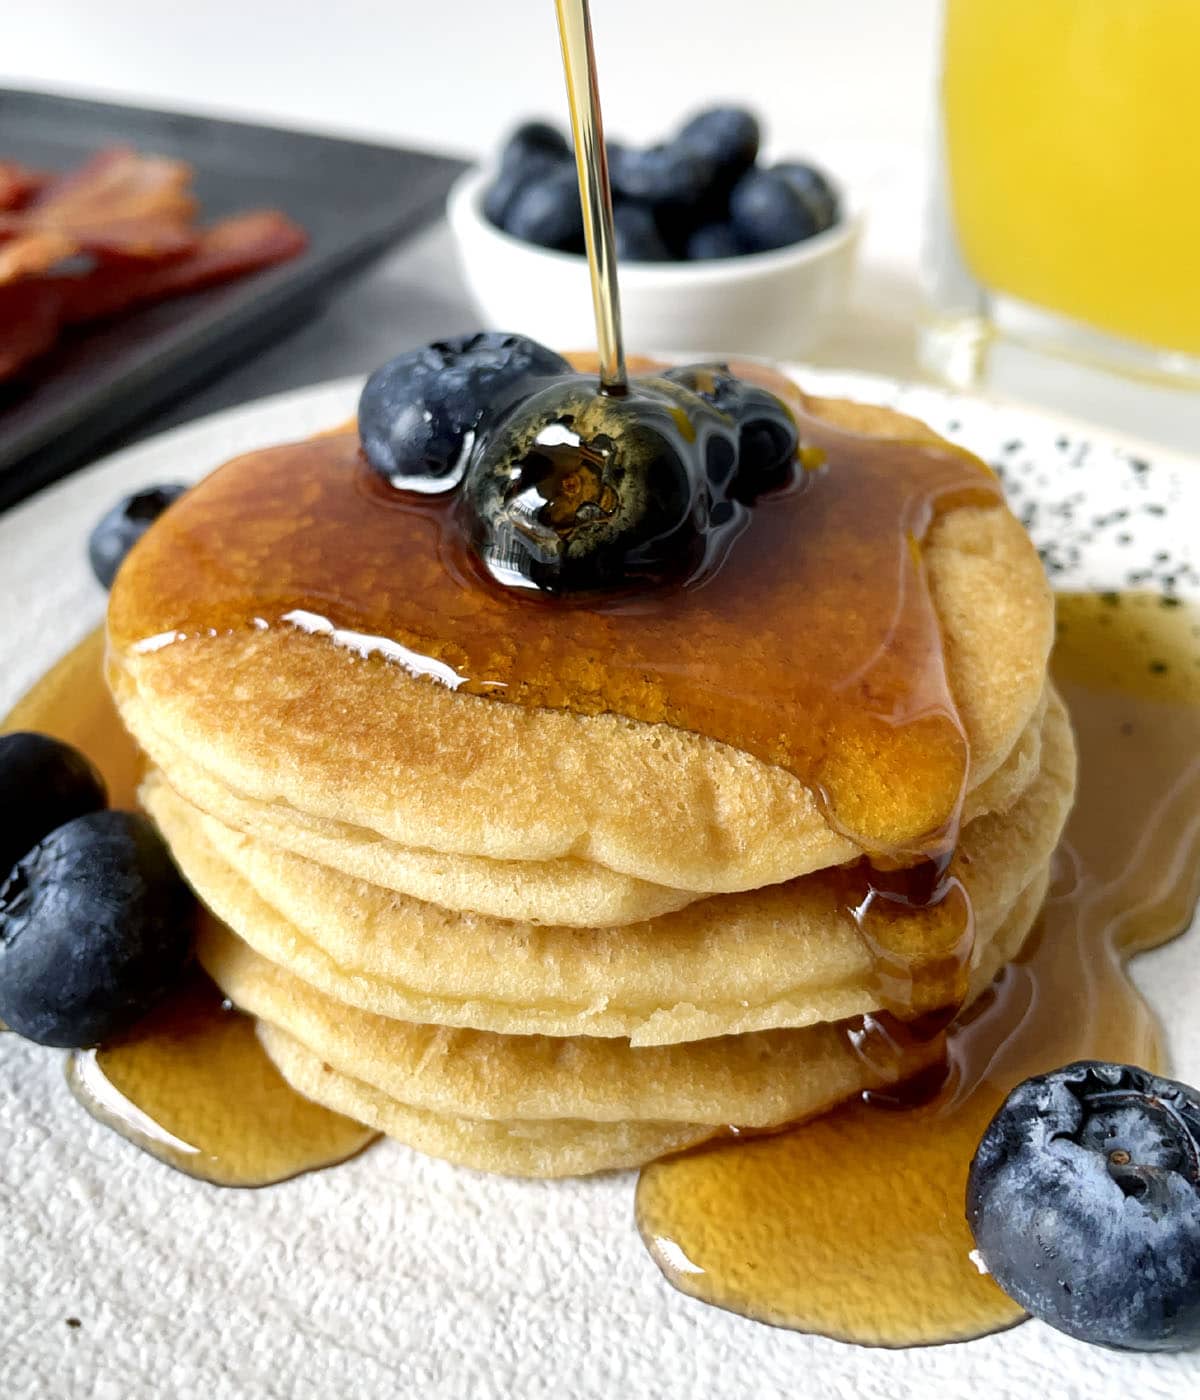 Brown syrup being poured over a stack of three pancakes topped with blueberries.